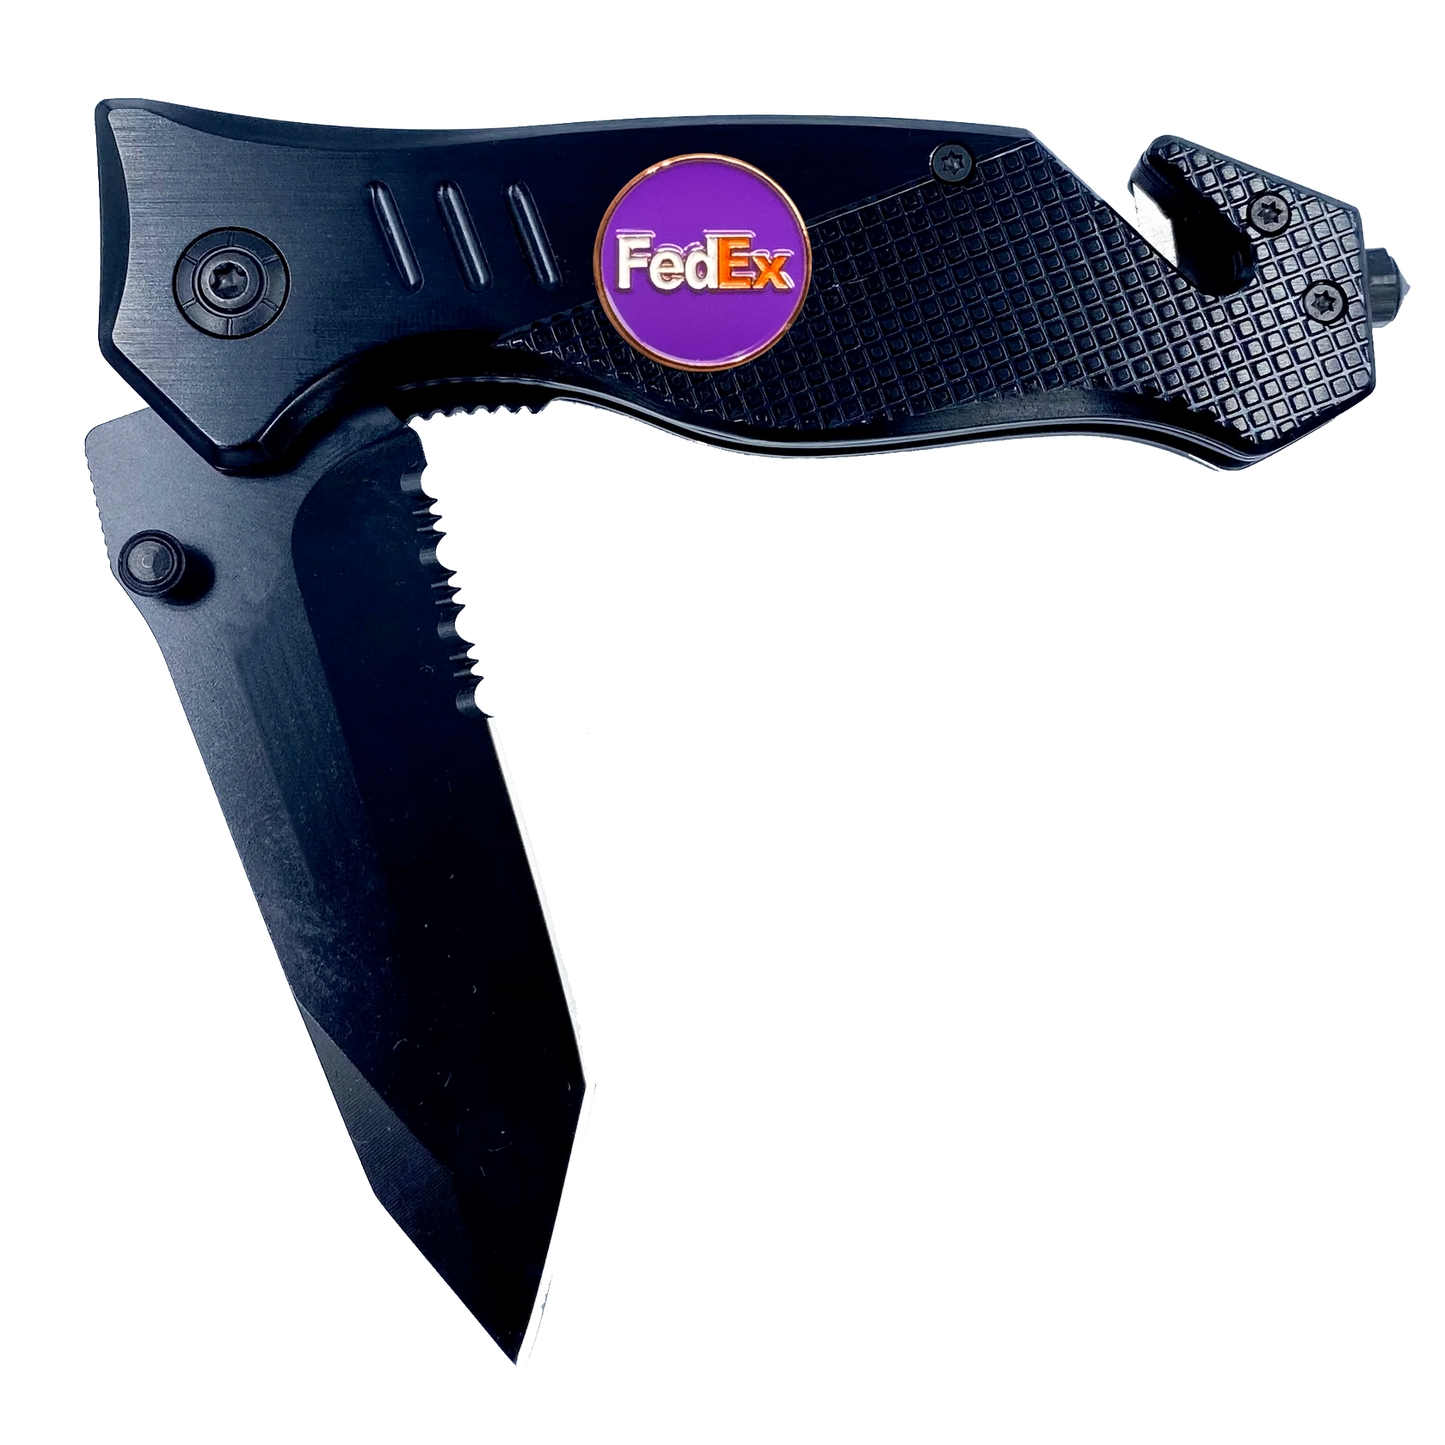 Box Opener Rescue Knife for Fedex Driver 3-in-1 tool with Seatbelt Cutter Steel Serrated Blade Glass Breaker